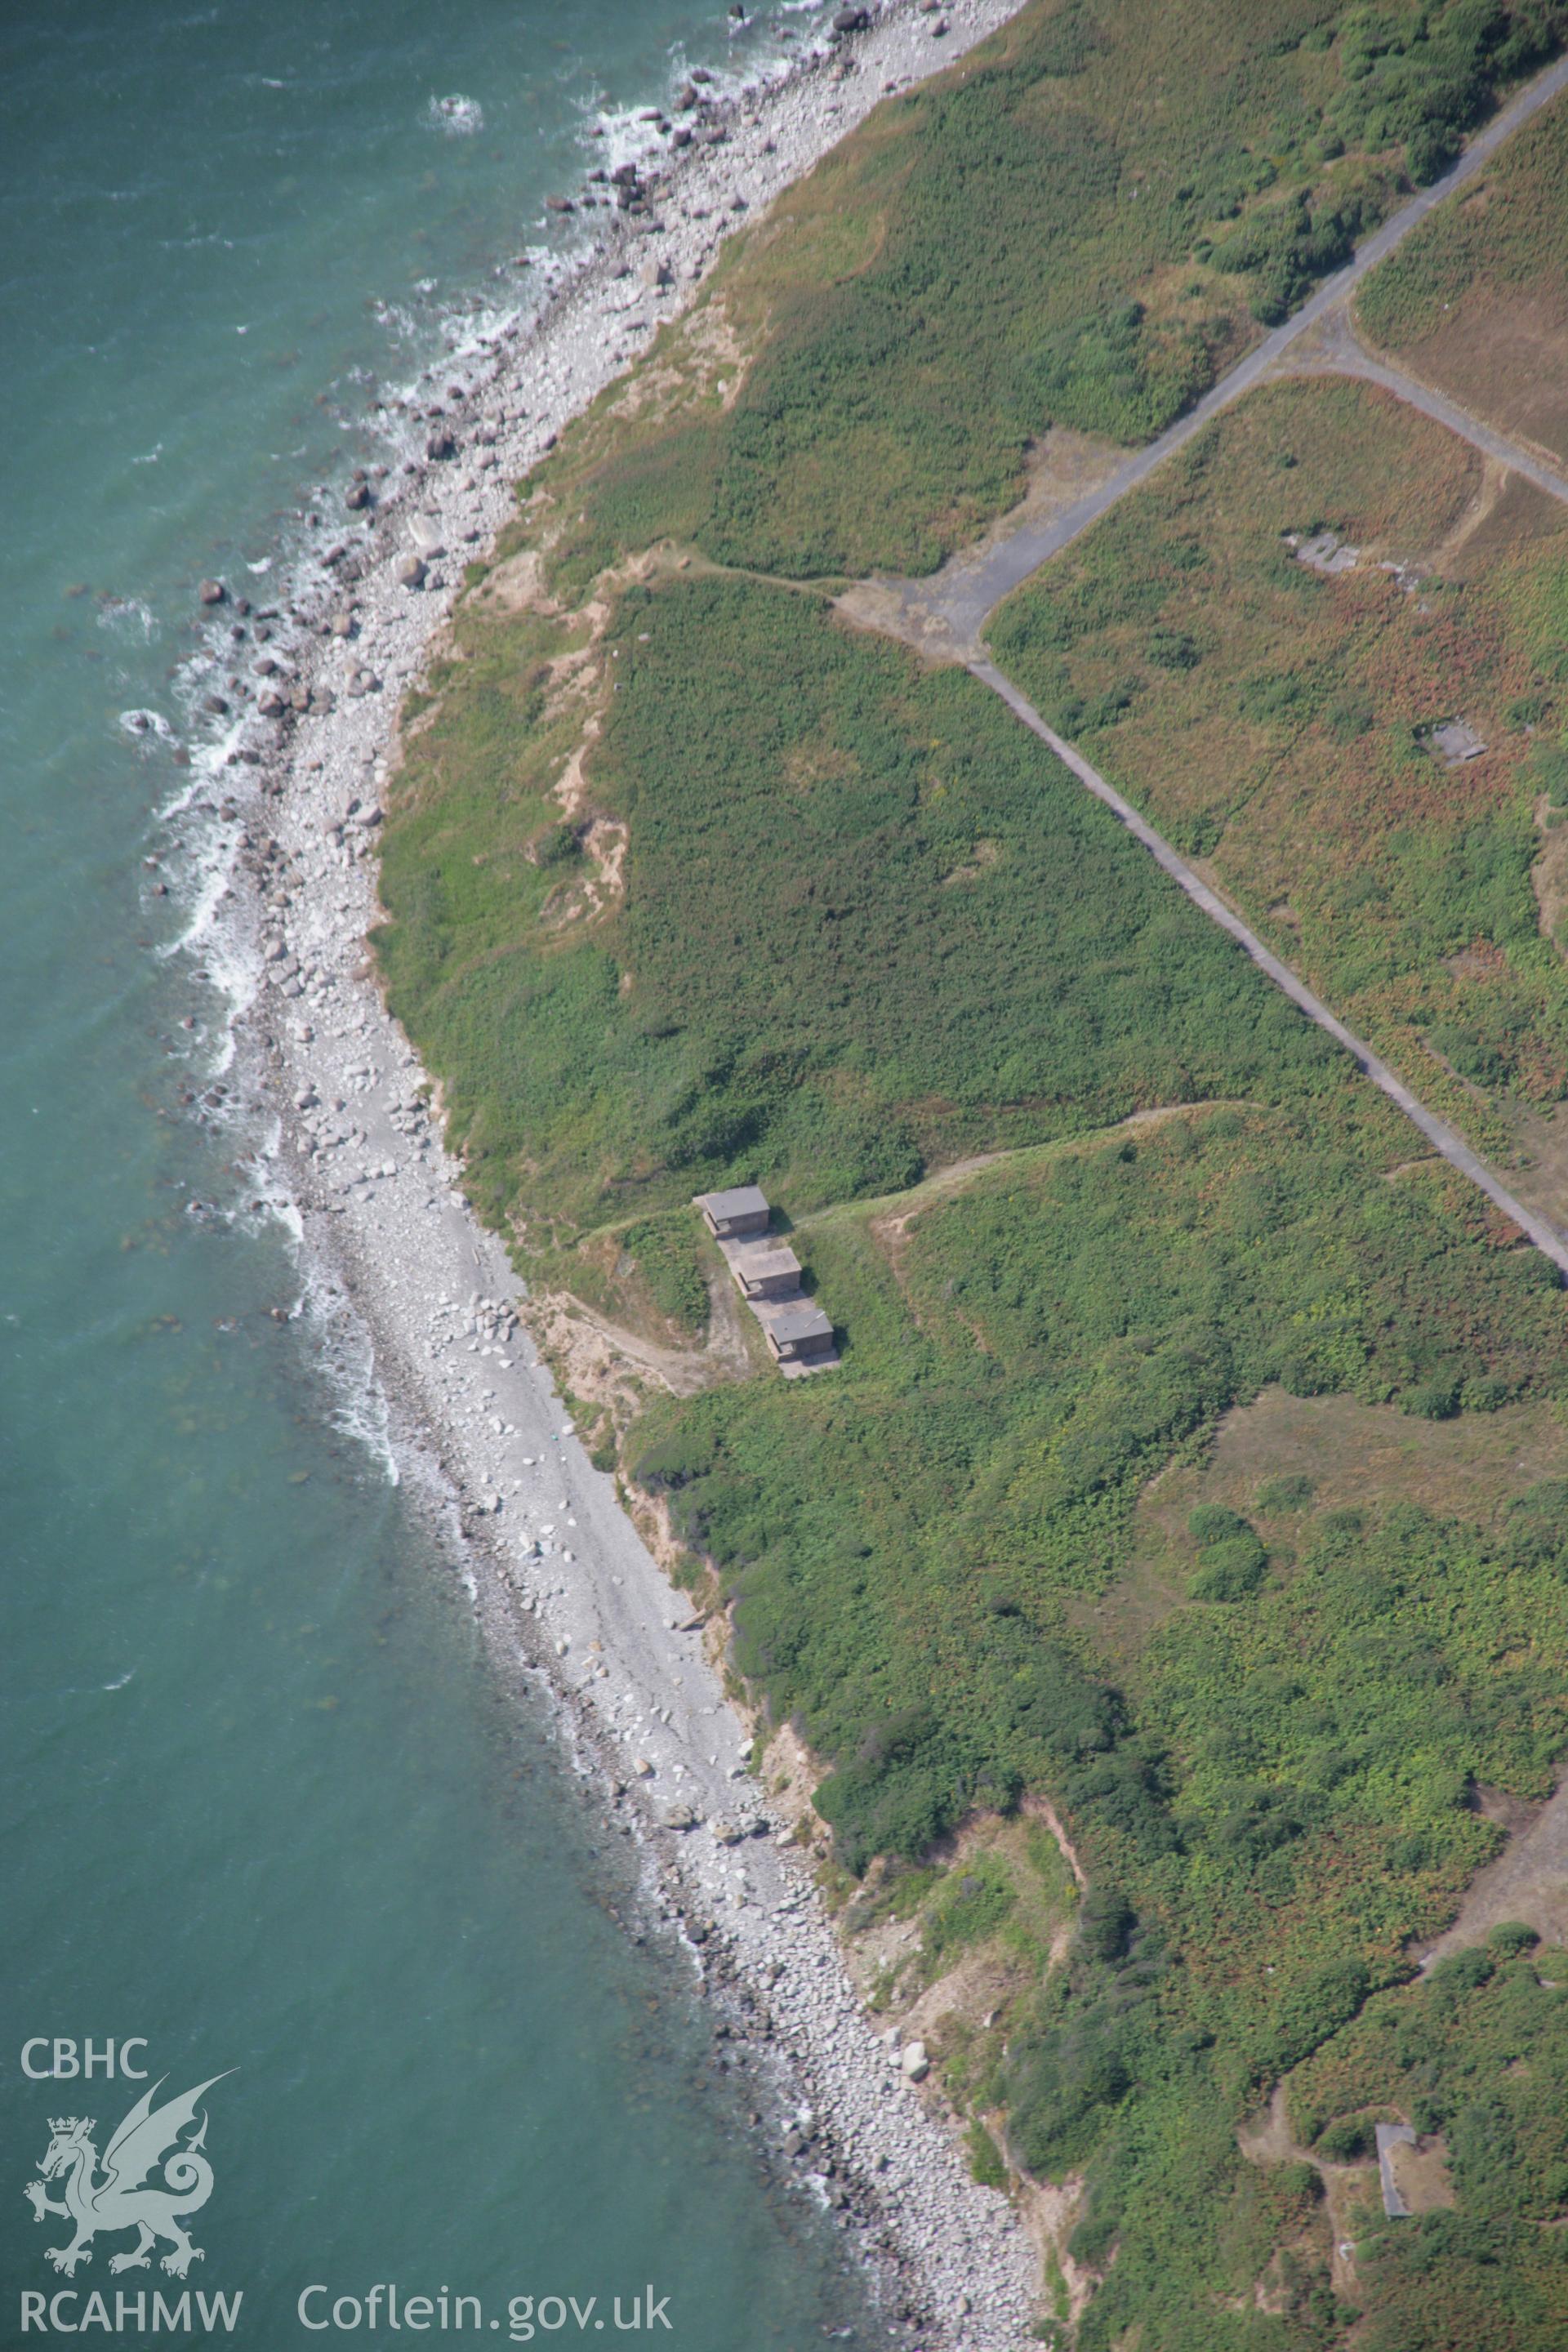 RCAHMW colour oblique aerial photograph of Trwynygogarth Gunnery Range, Great Orme's Head. Taken on 14 August 2006 by Toby Driver.